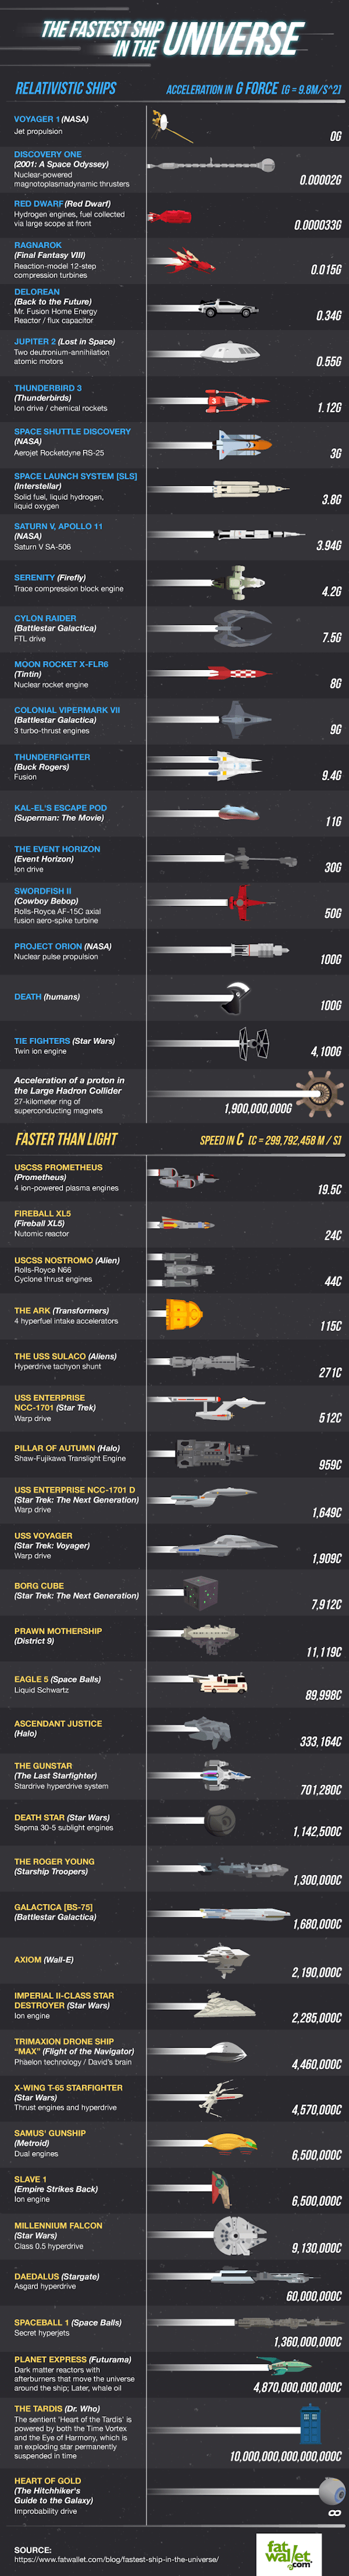 Infographic: What’s The Fastest Ship In Sci-Fi History?